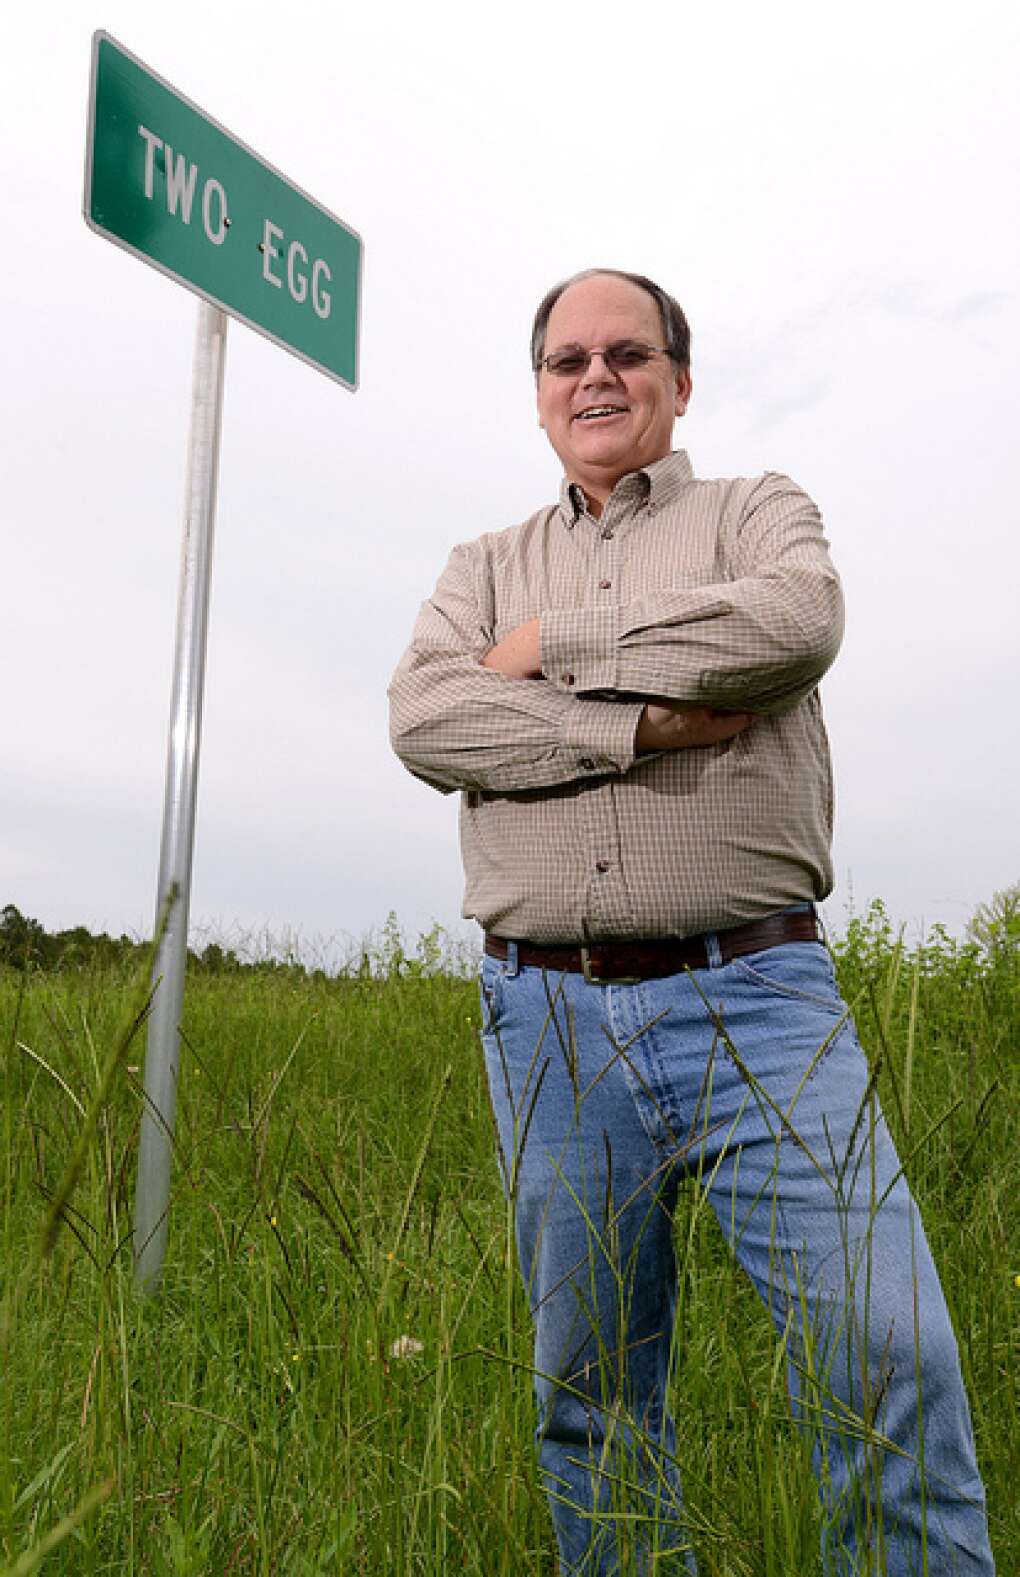 Historian Dale Fox, raised in Two Egg, stands in front of a Two Egg road sign.